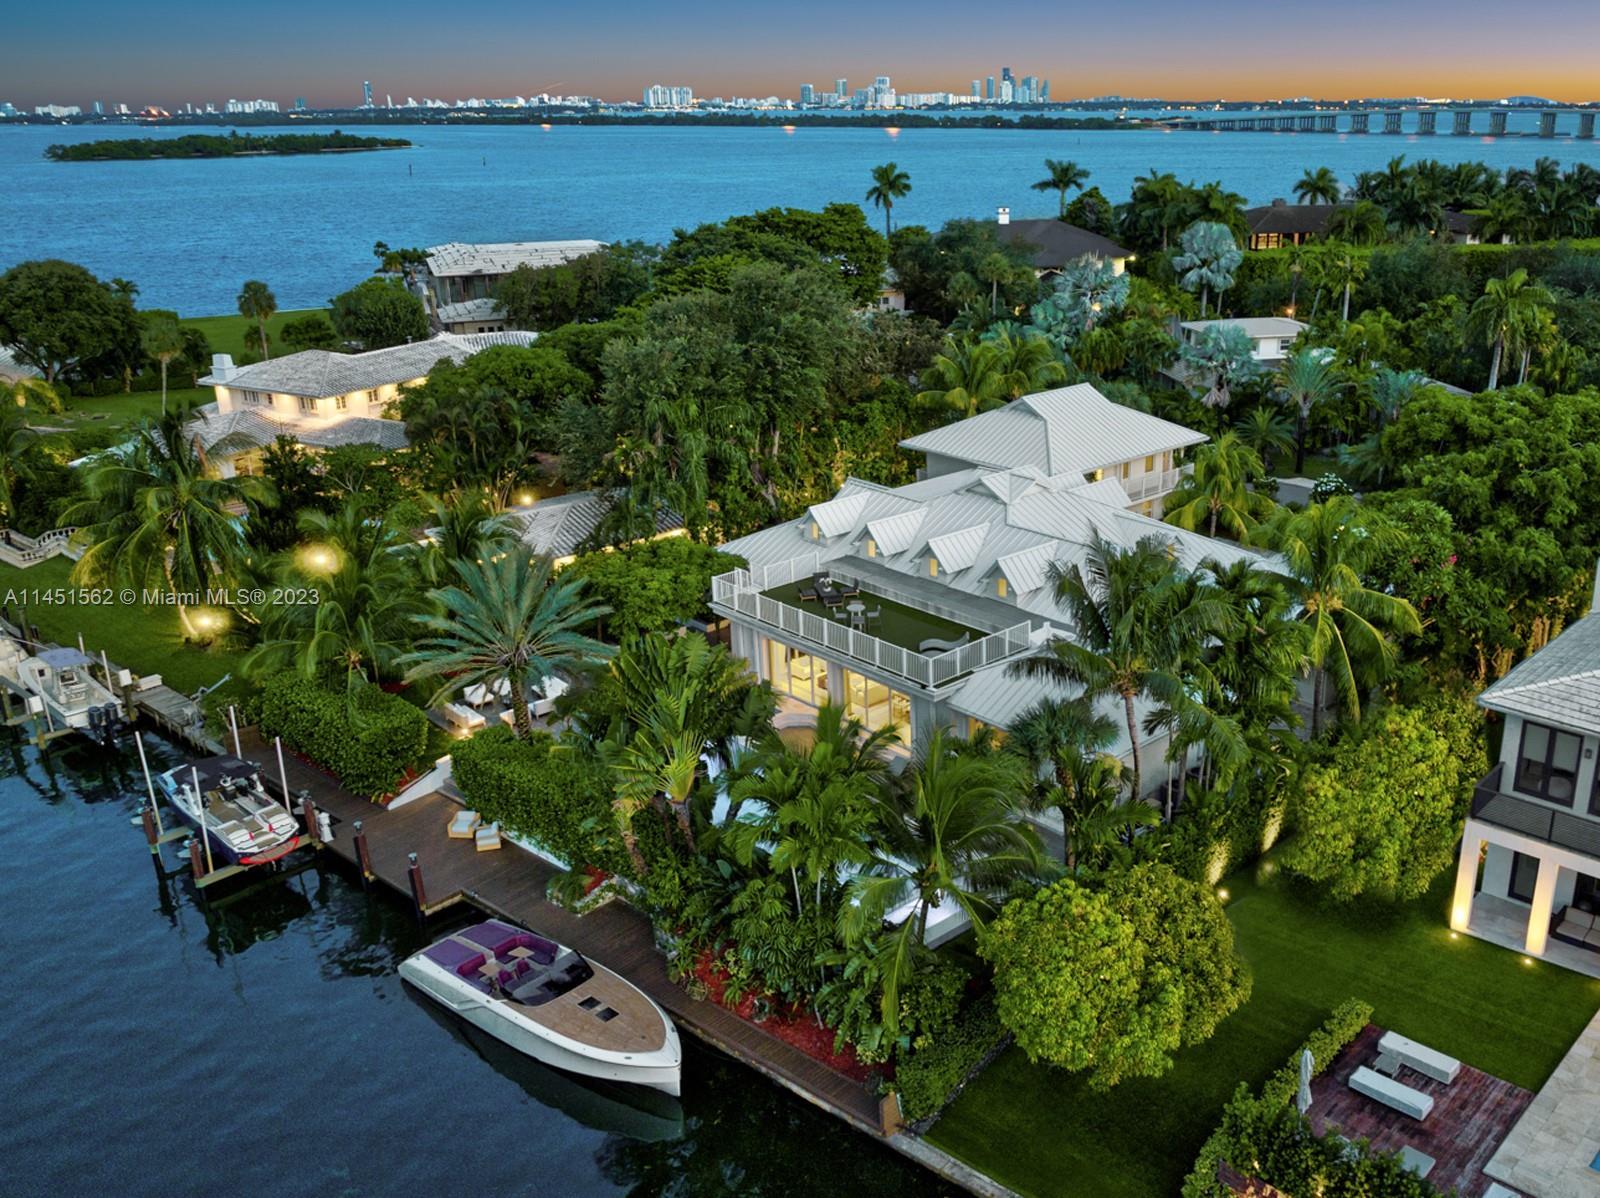 Welcome to Casa Aqua! This boater’s dream modern-Island waterfront residence boasts 120 ft of water 